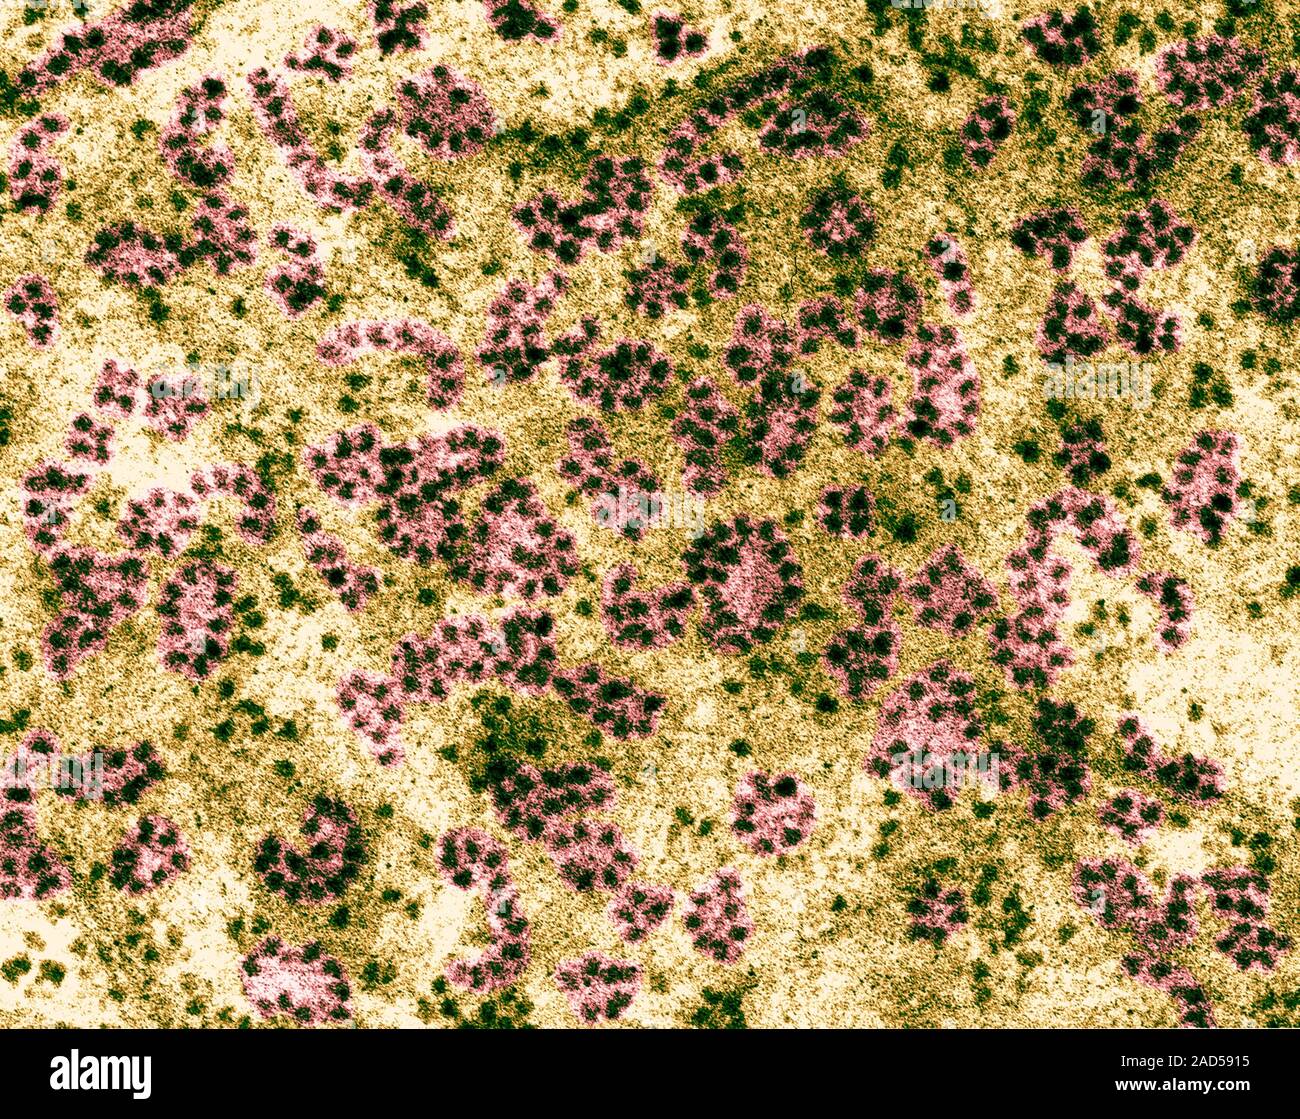 Ribosomes and polyribosomes (liver cell - hepatocyte), coloured ...